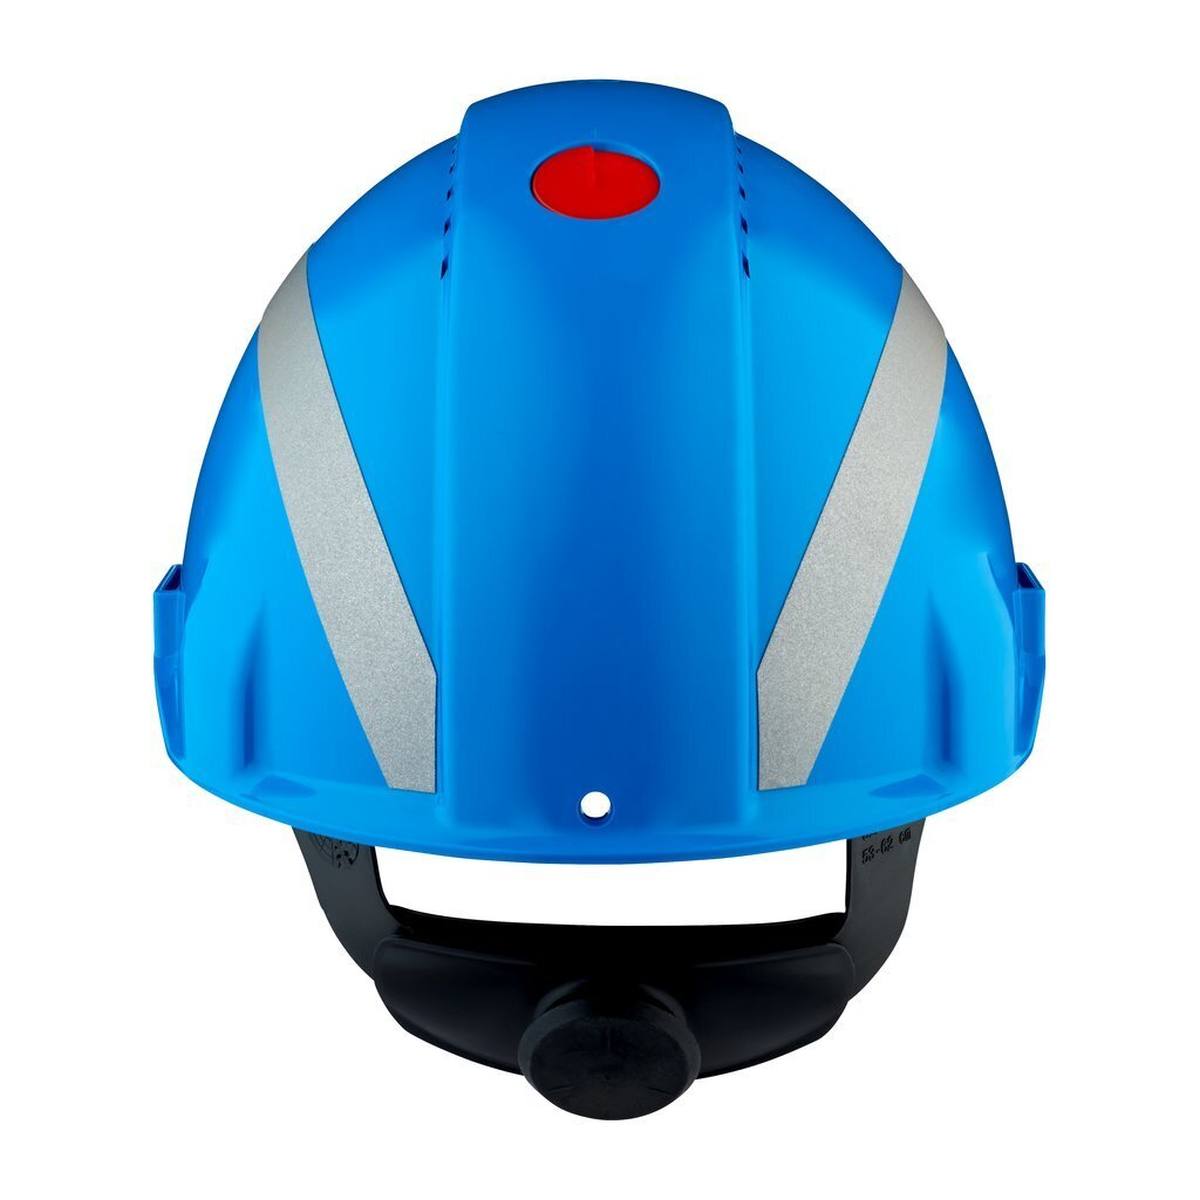 3M G3000 safety helmet with UV indicator, blue, ABS, ventilated ratchet fastener, plastic sweatband, reflective sticker